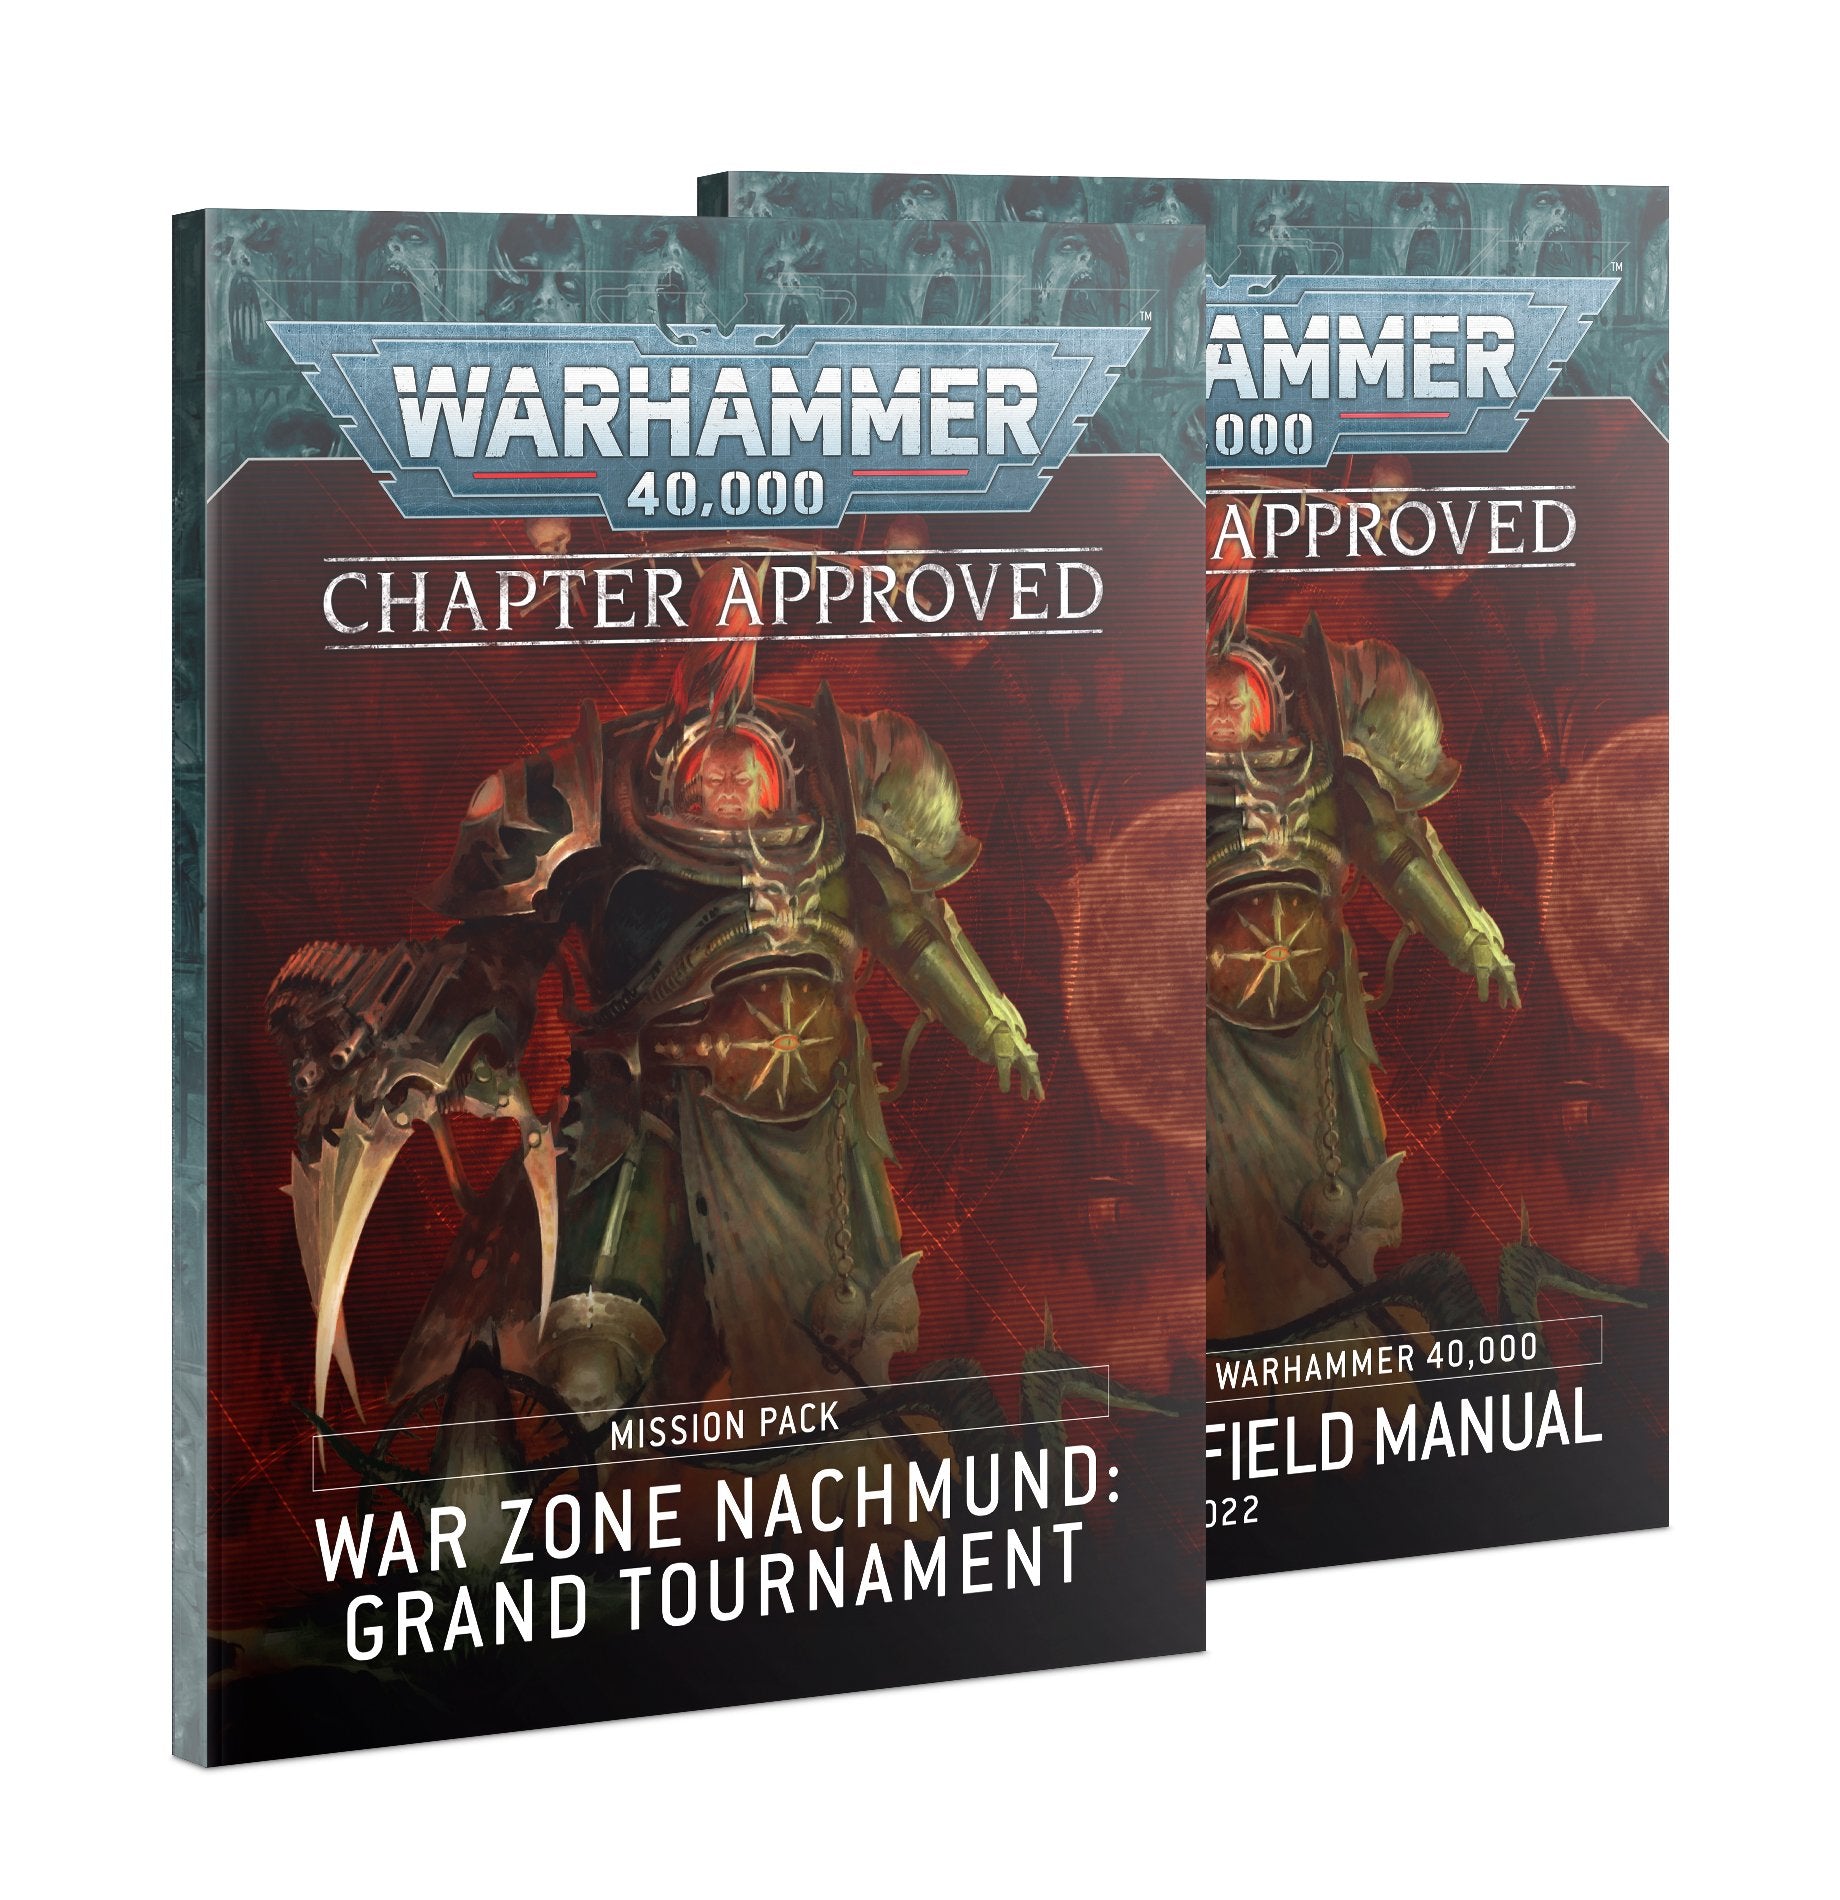 Chapter Approved: War Zone Nachmund Grand Tournament Mission Pack and Munitorum Field Manual 2022 | Jack's On Queen